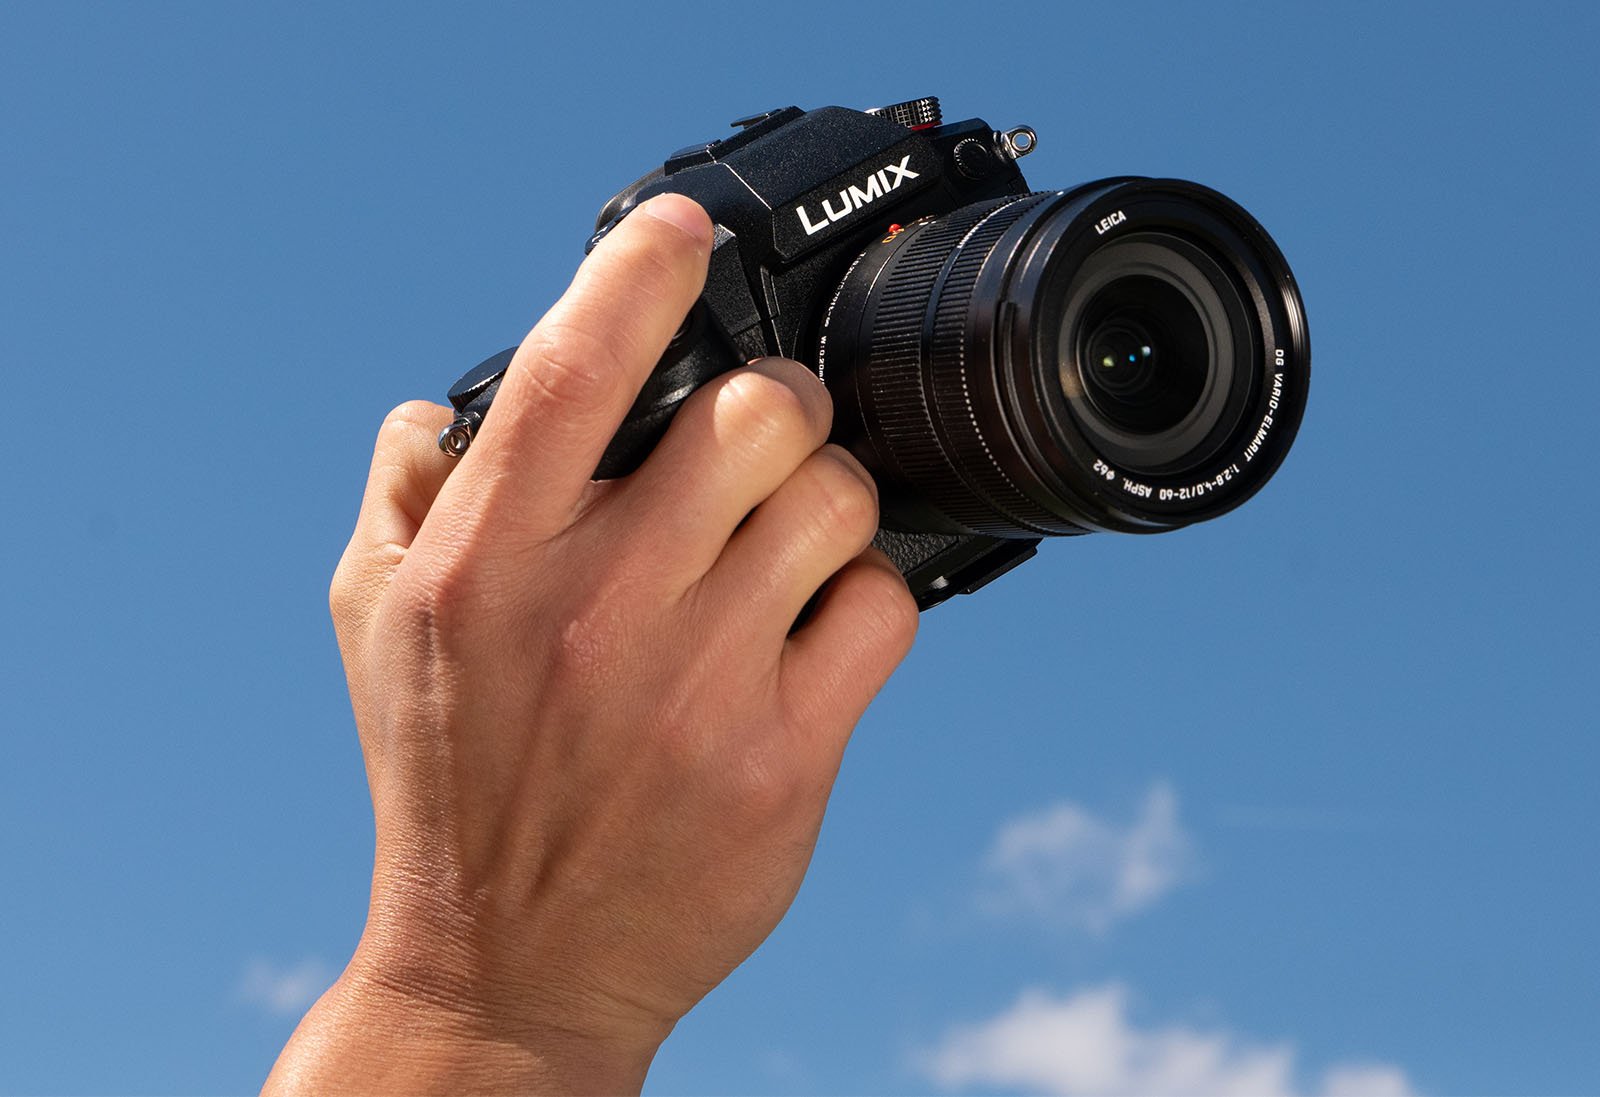 A hand holding a Panasonic Lumix camera against a clear blue sky with a few scattered clouds. The camera is pointed towards the viewer, showcasing its lens and front details.